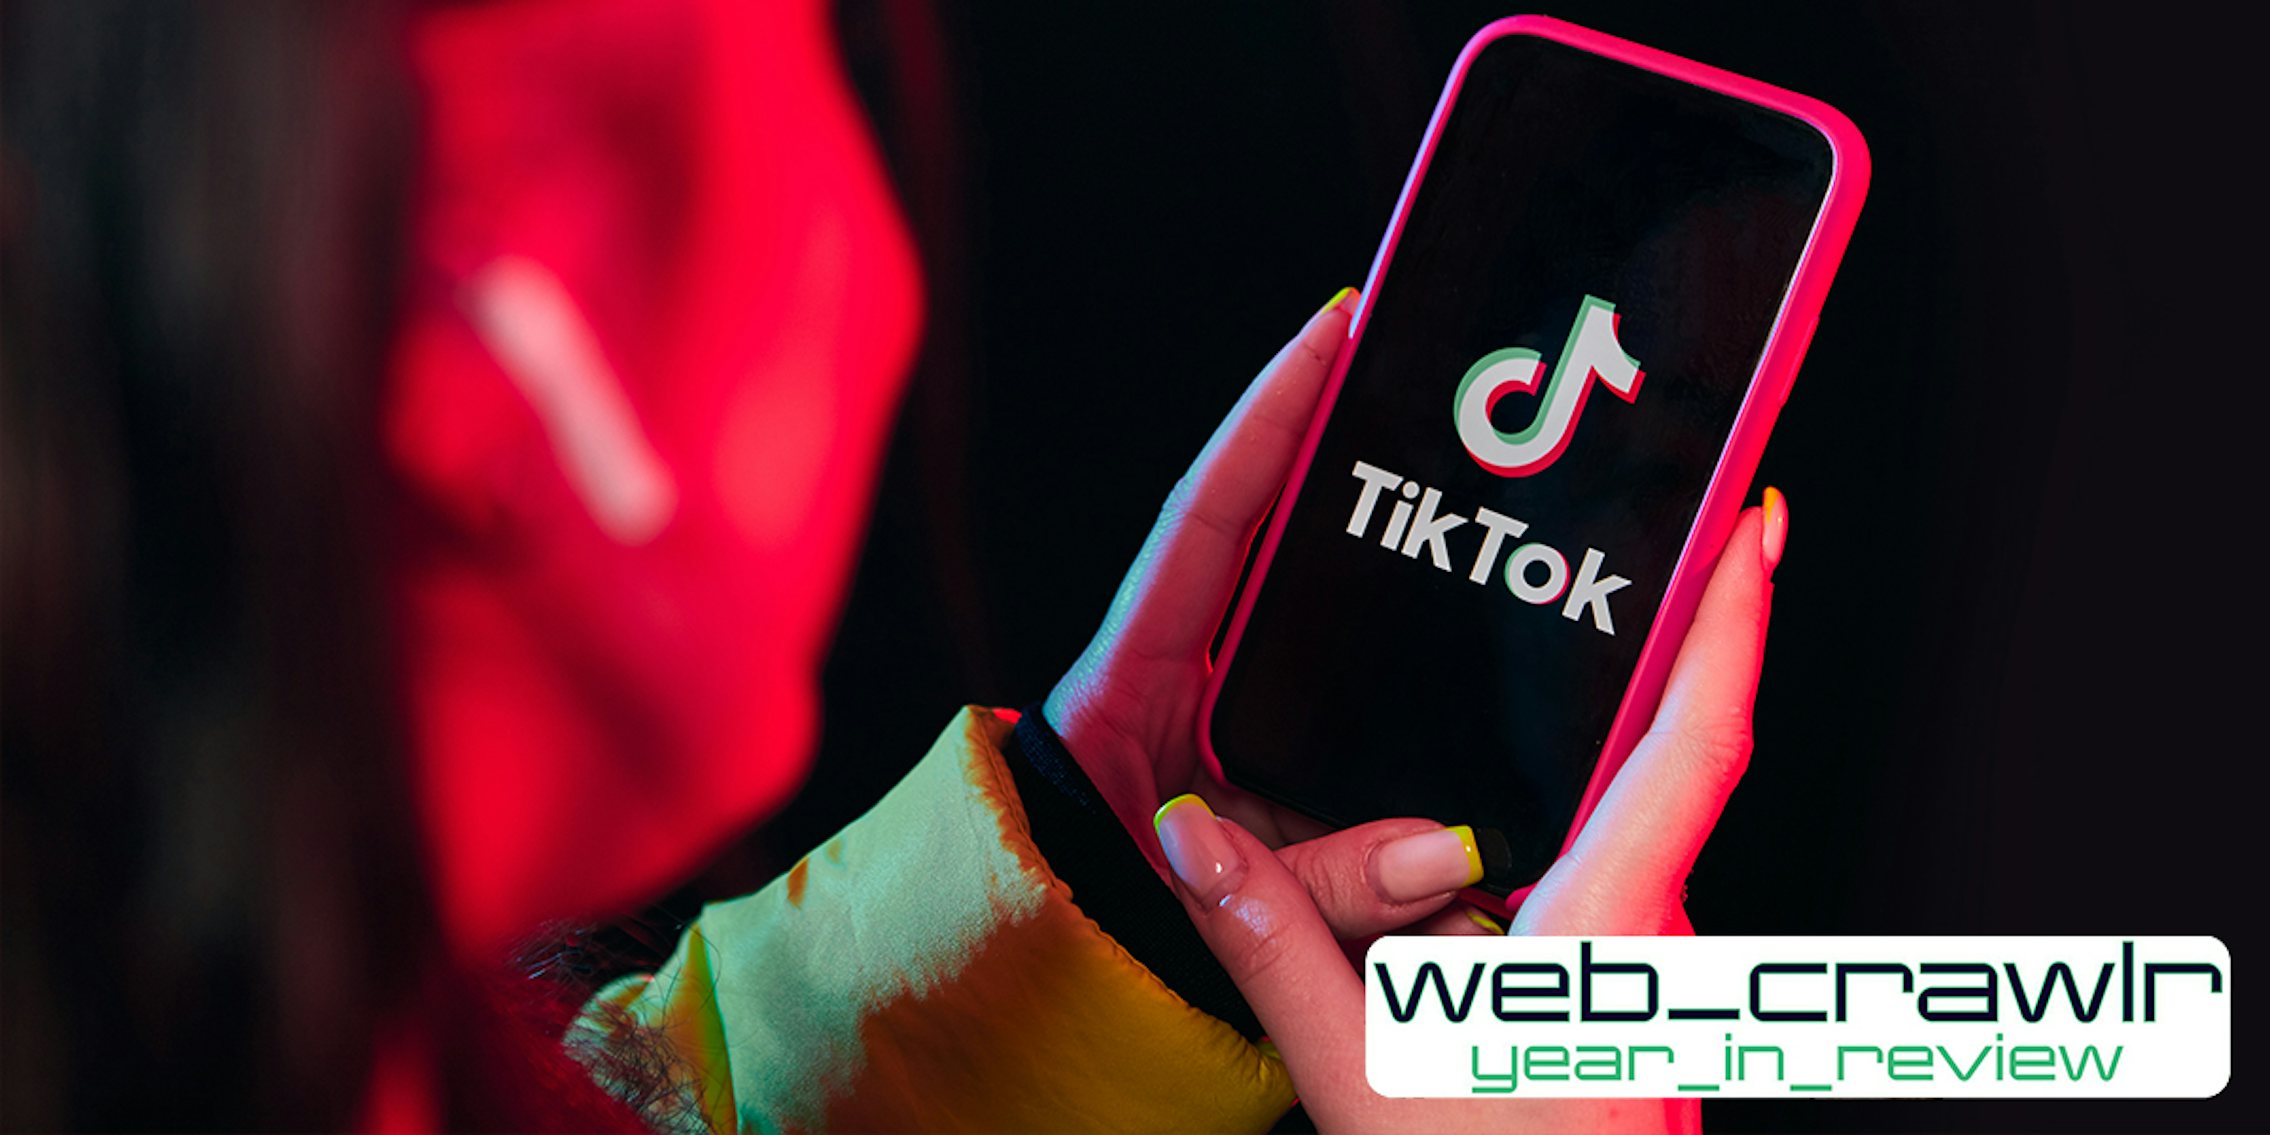 8 TikTok Trends to Fuel Your Content for 2023